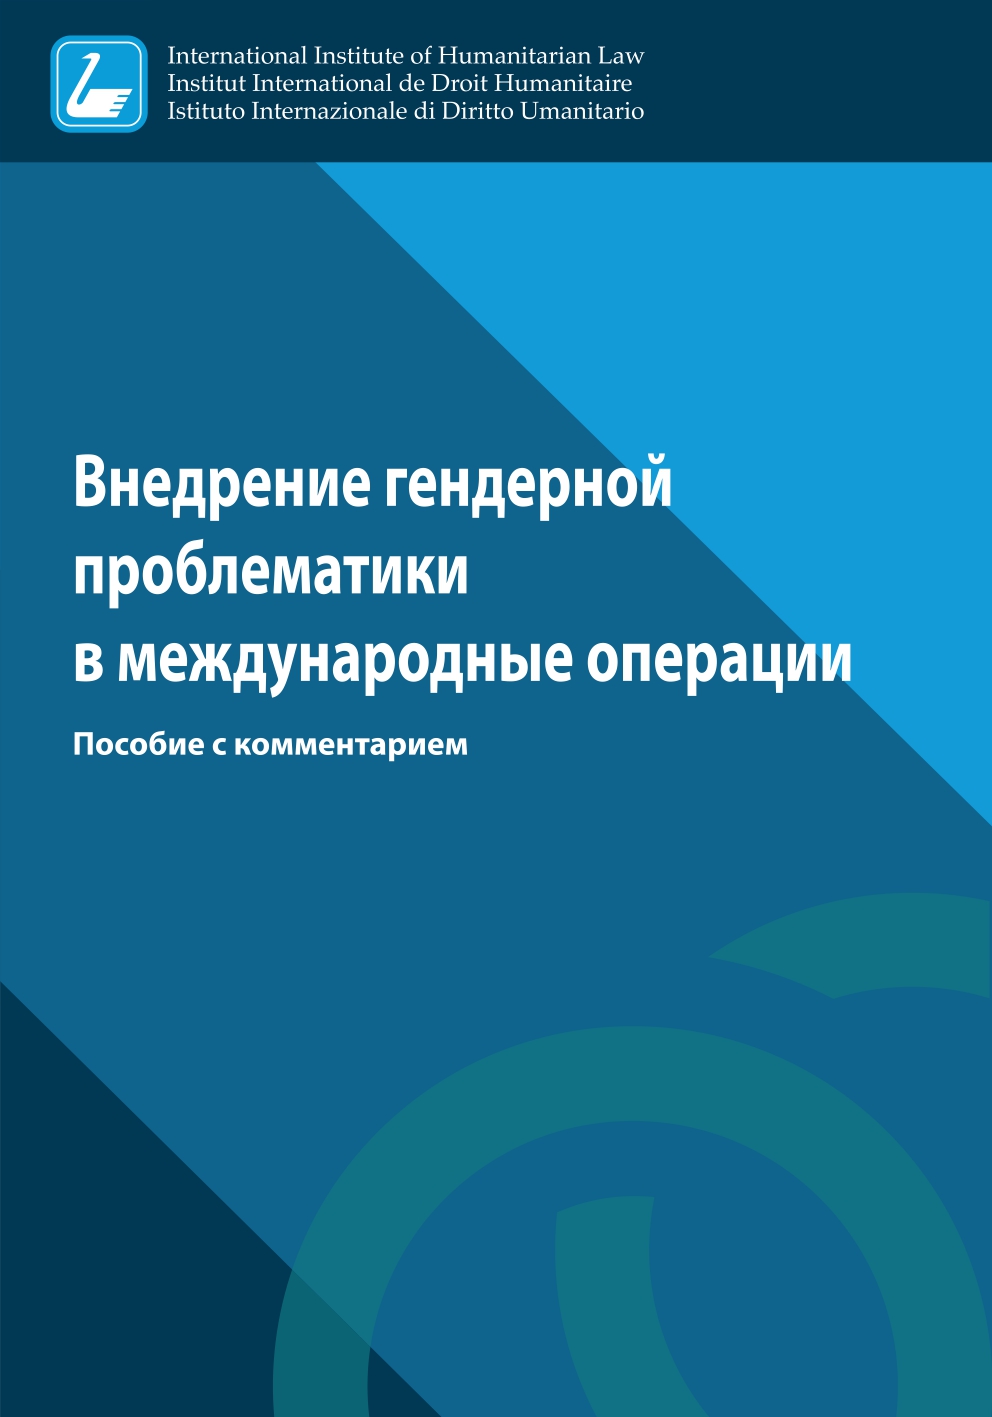 Presentation of the Russian version of the Sanremo handbook on “Integrating gender perspectives into International Operations”